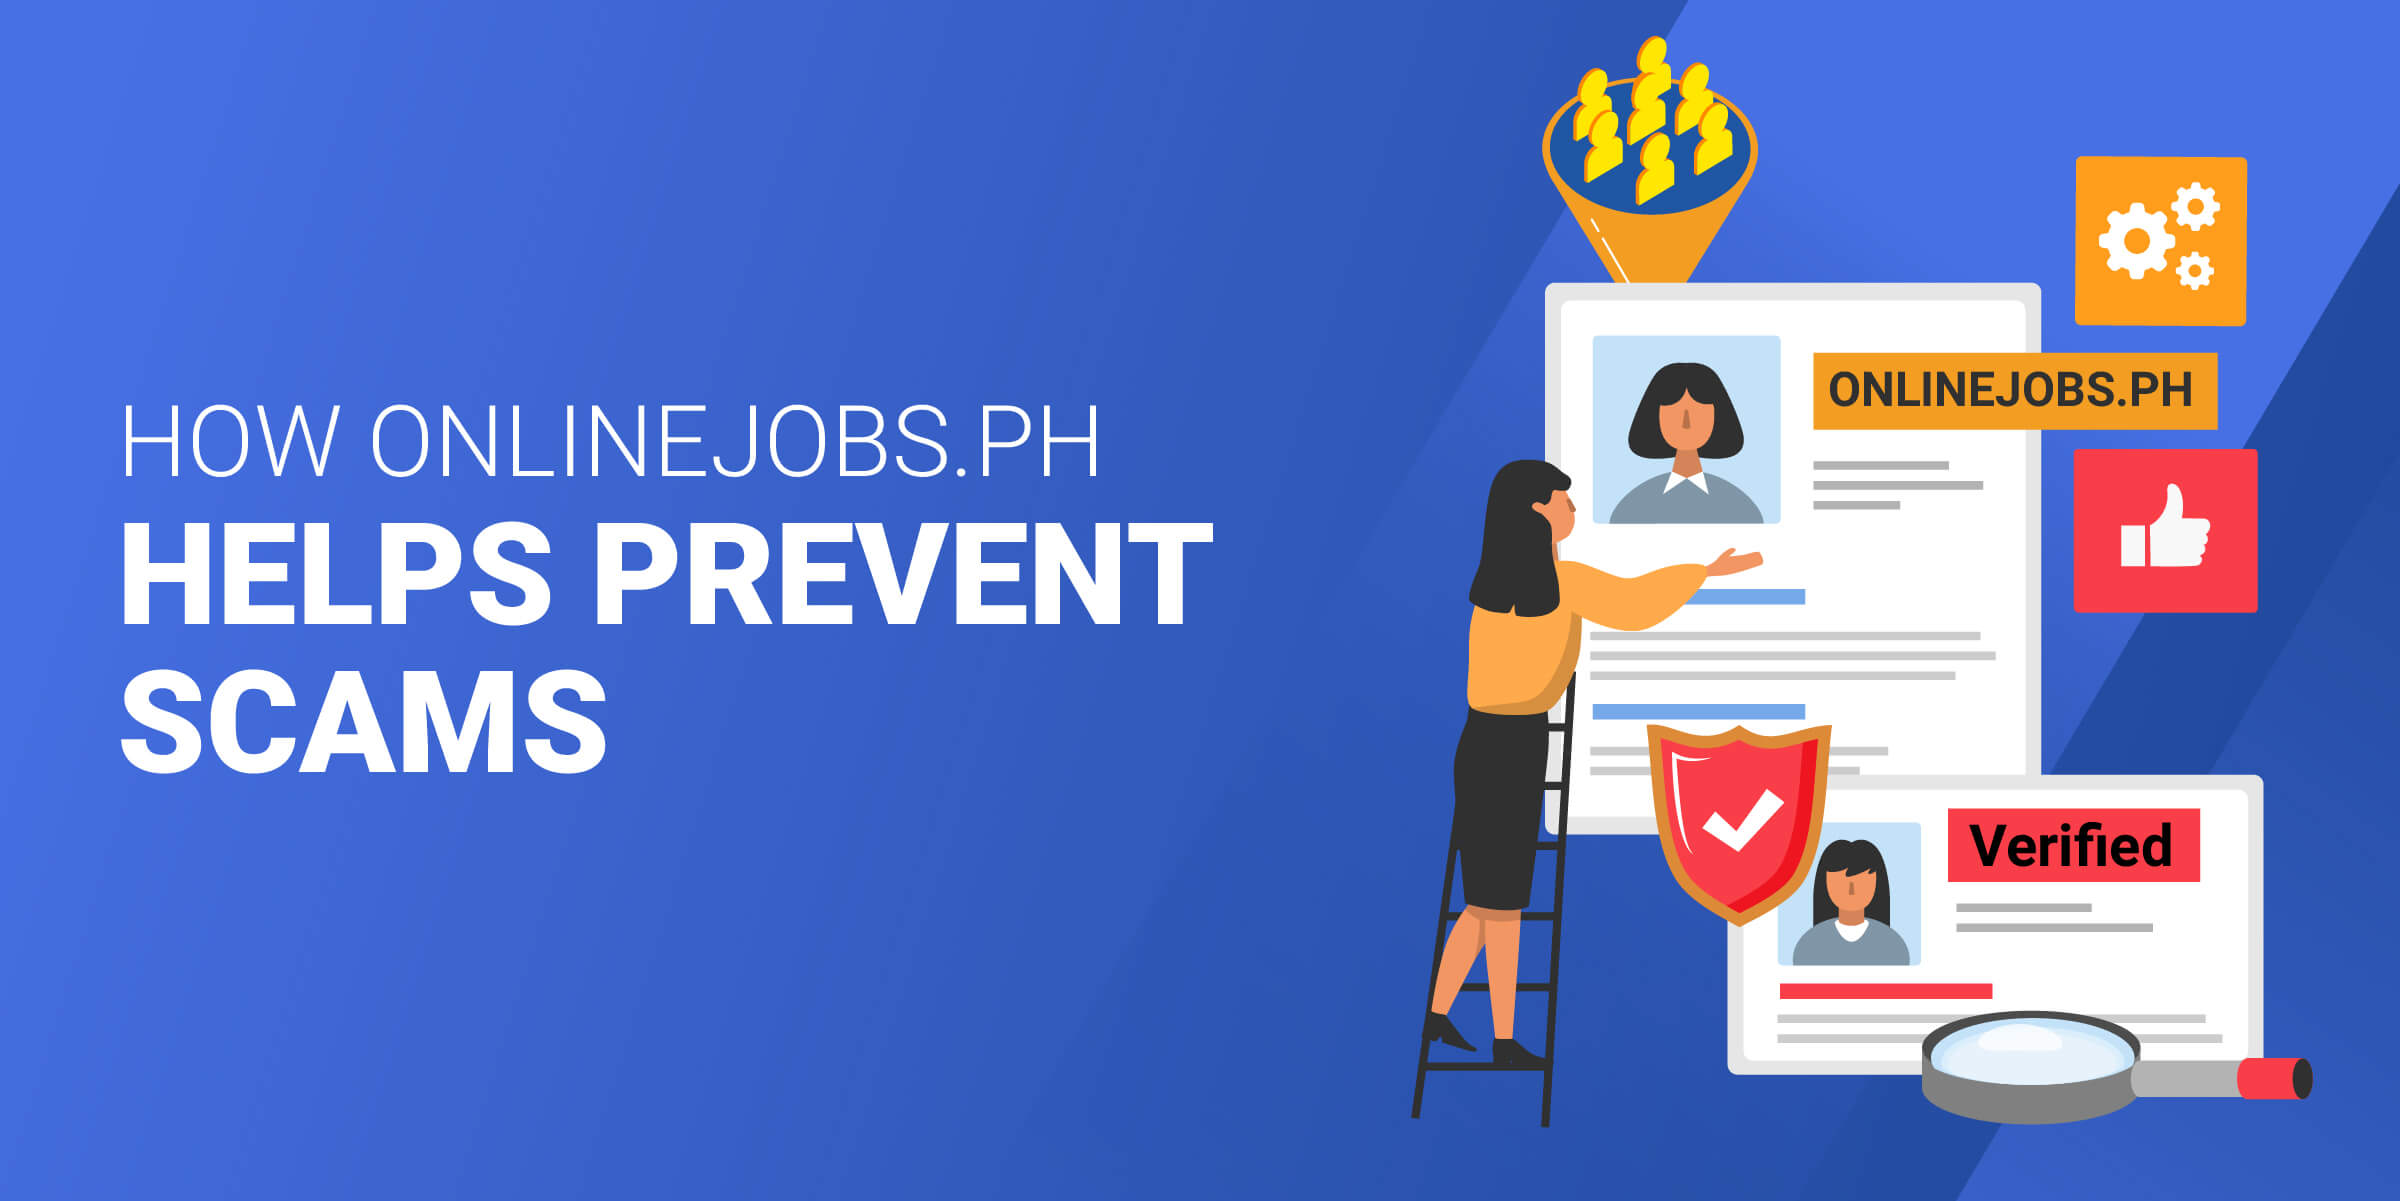 How OnlineJobs.PH Helps Prevent Scams